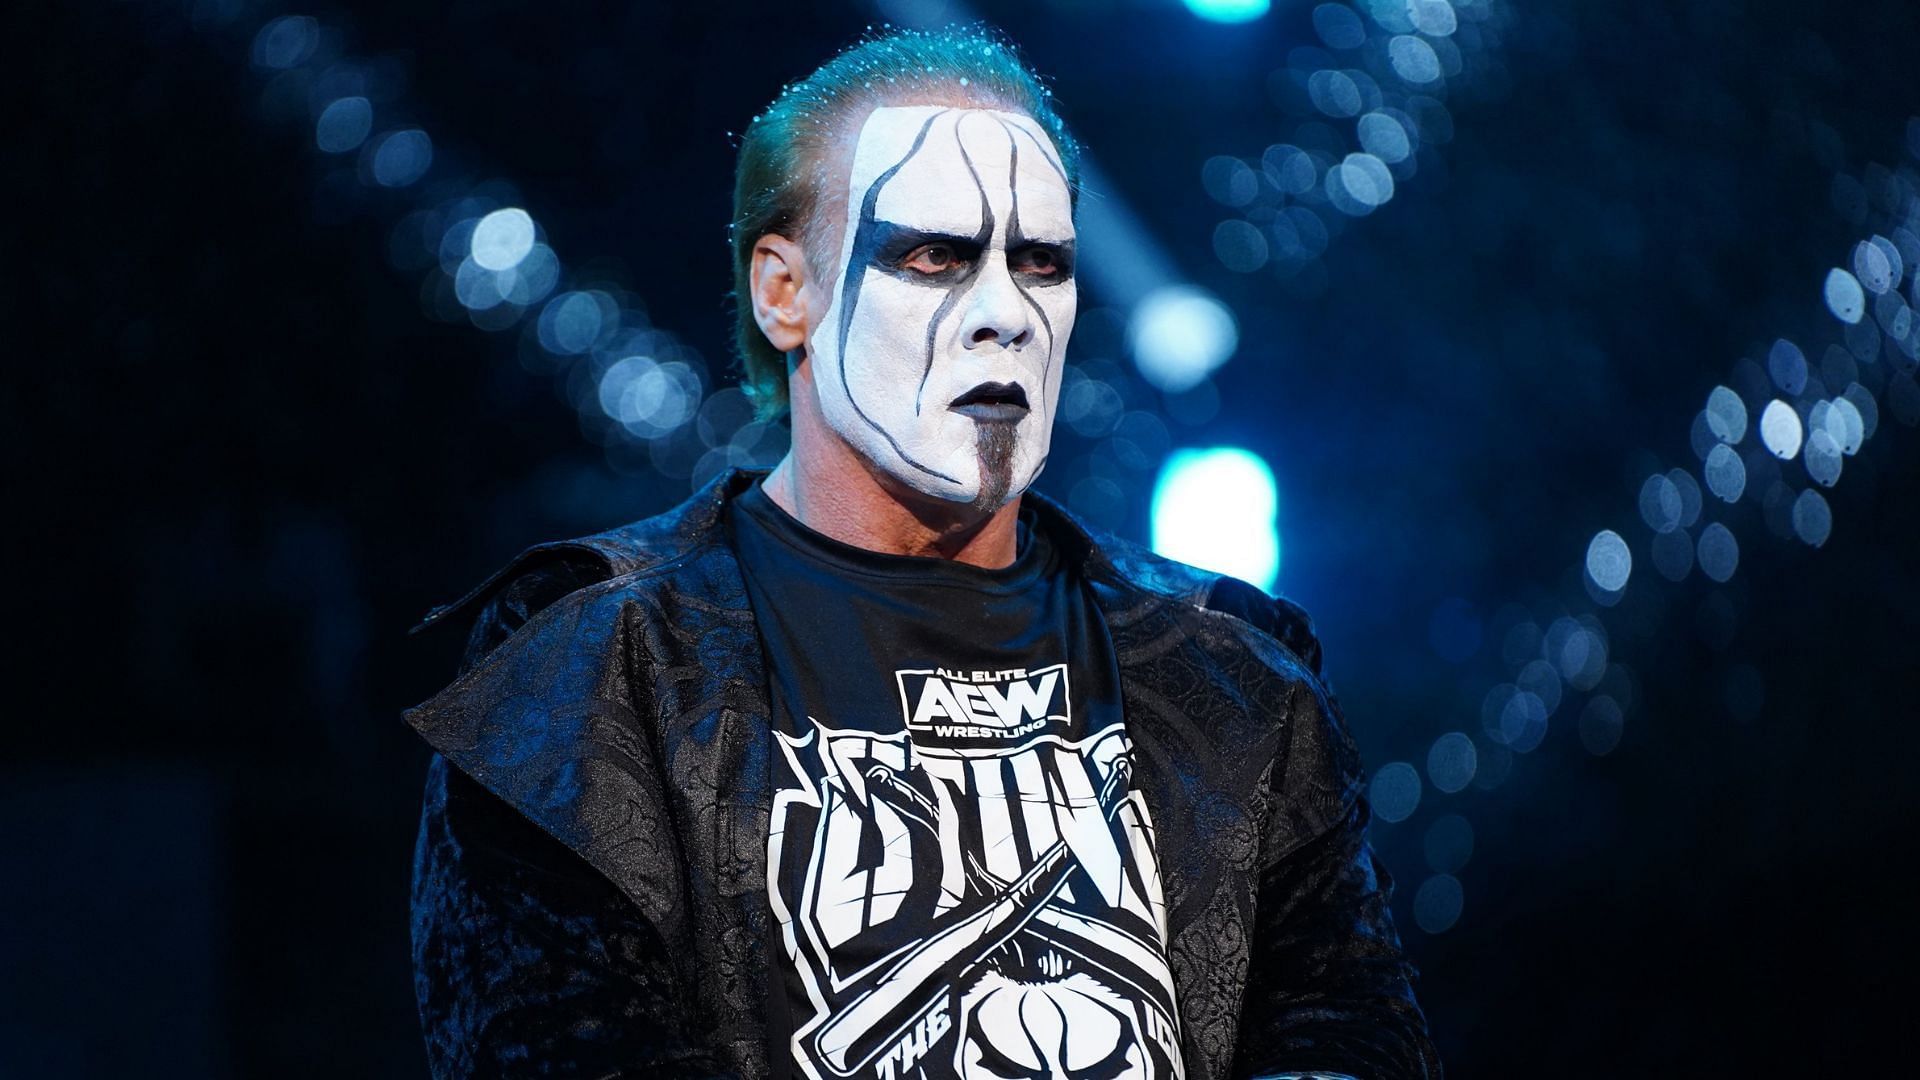 Sting has wrestled in TNA, WWE, and is now in AEW.